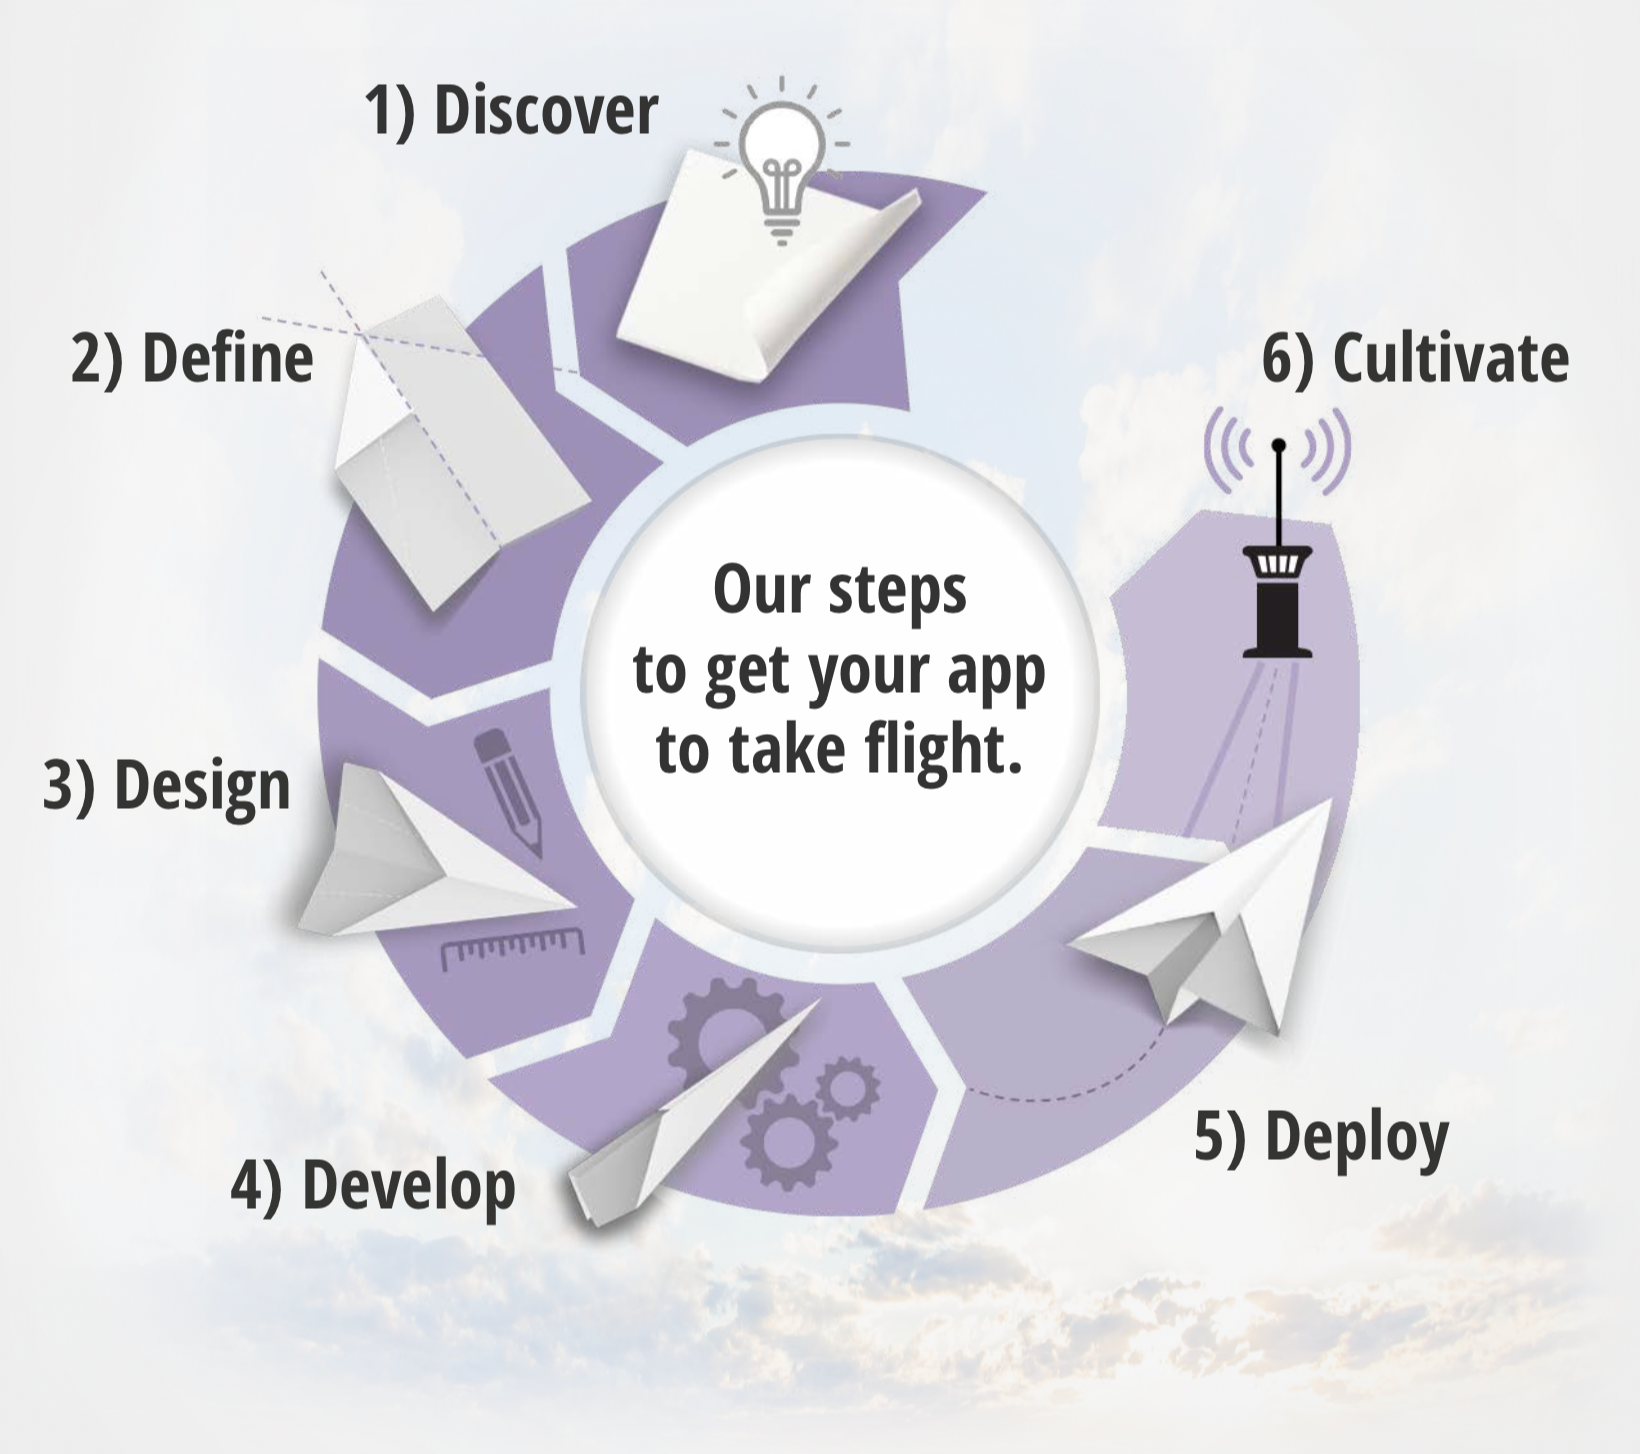 See our steps to get your app to take flight